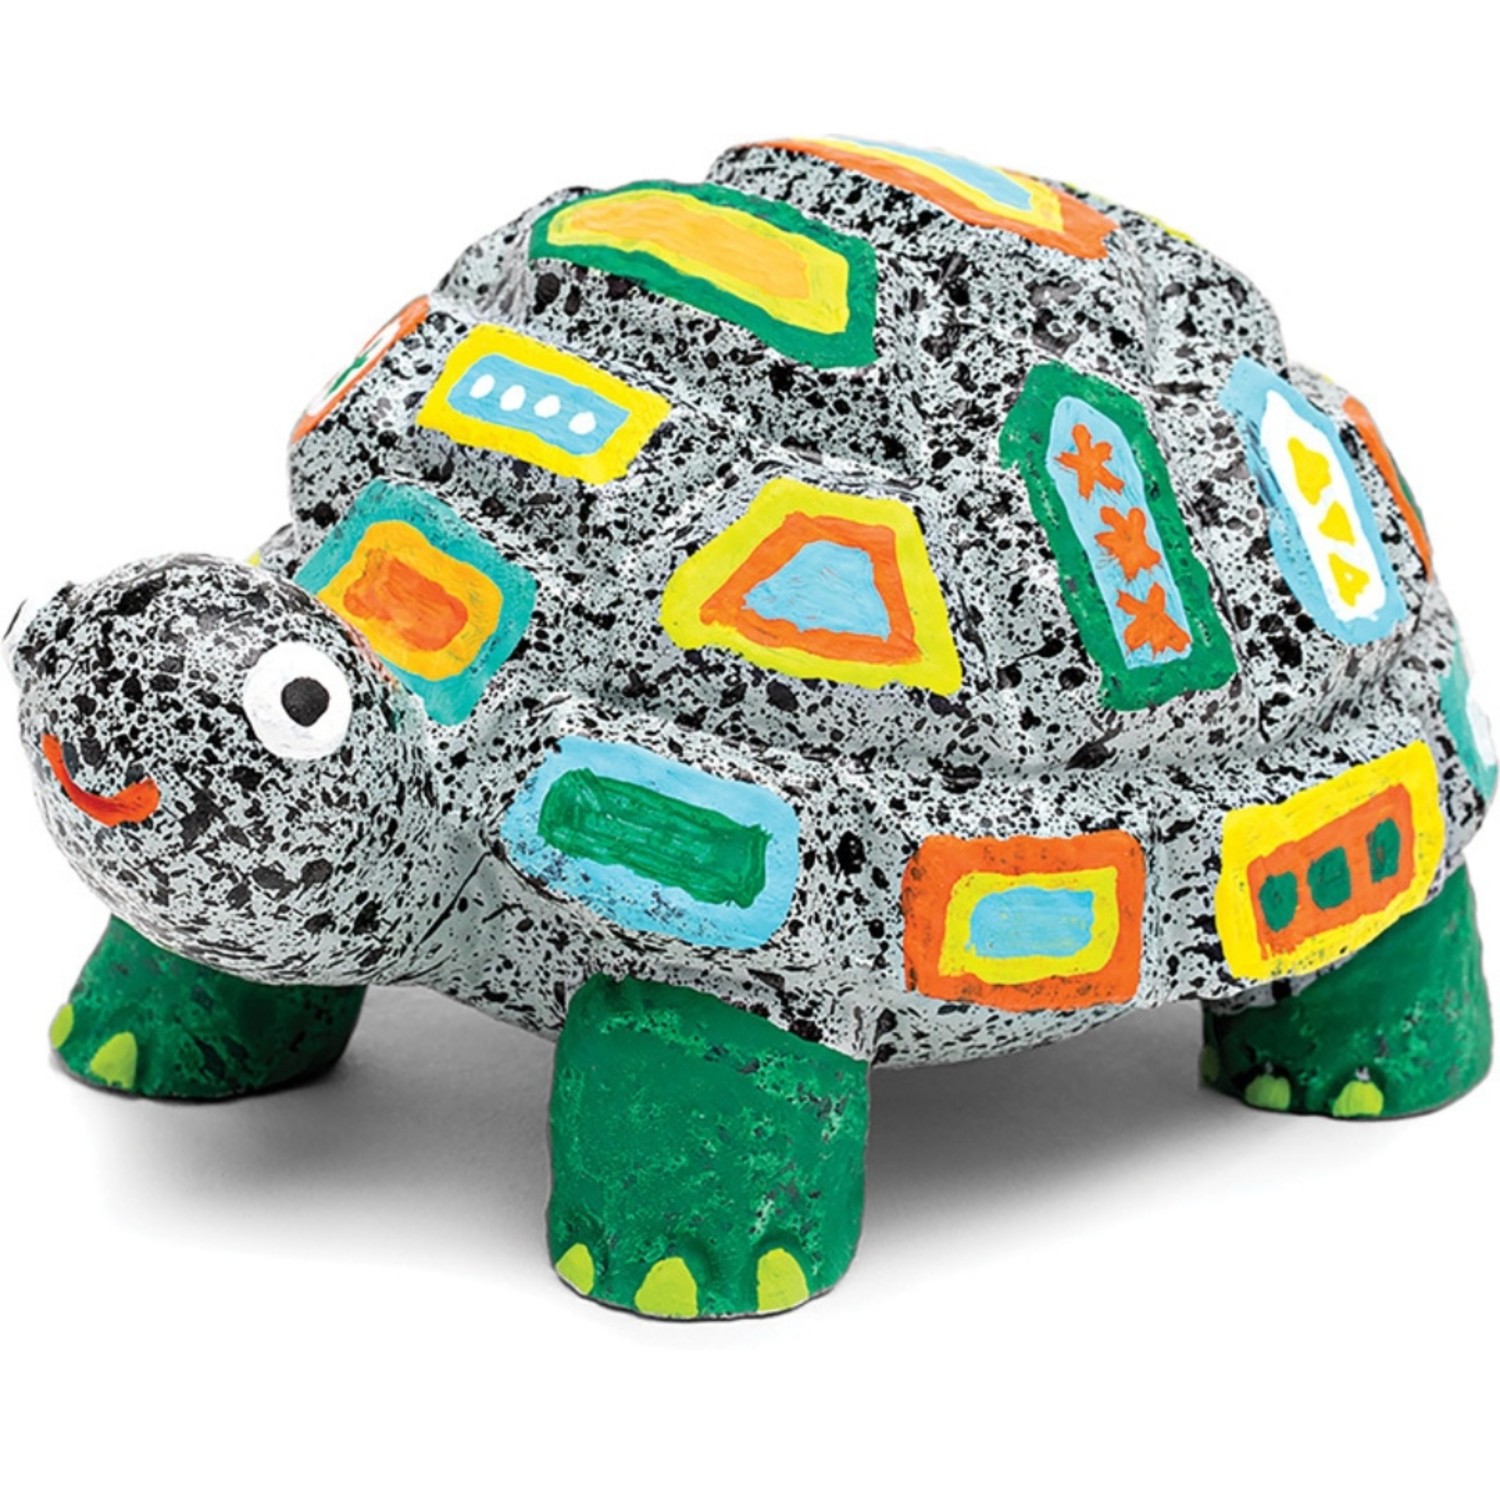 Turtle Rock Pets - Mudpuddles Toys and Books